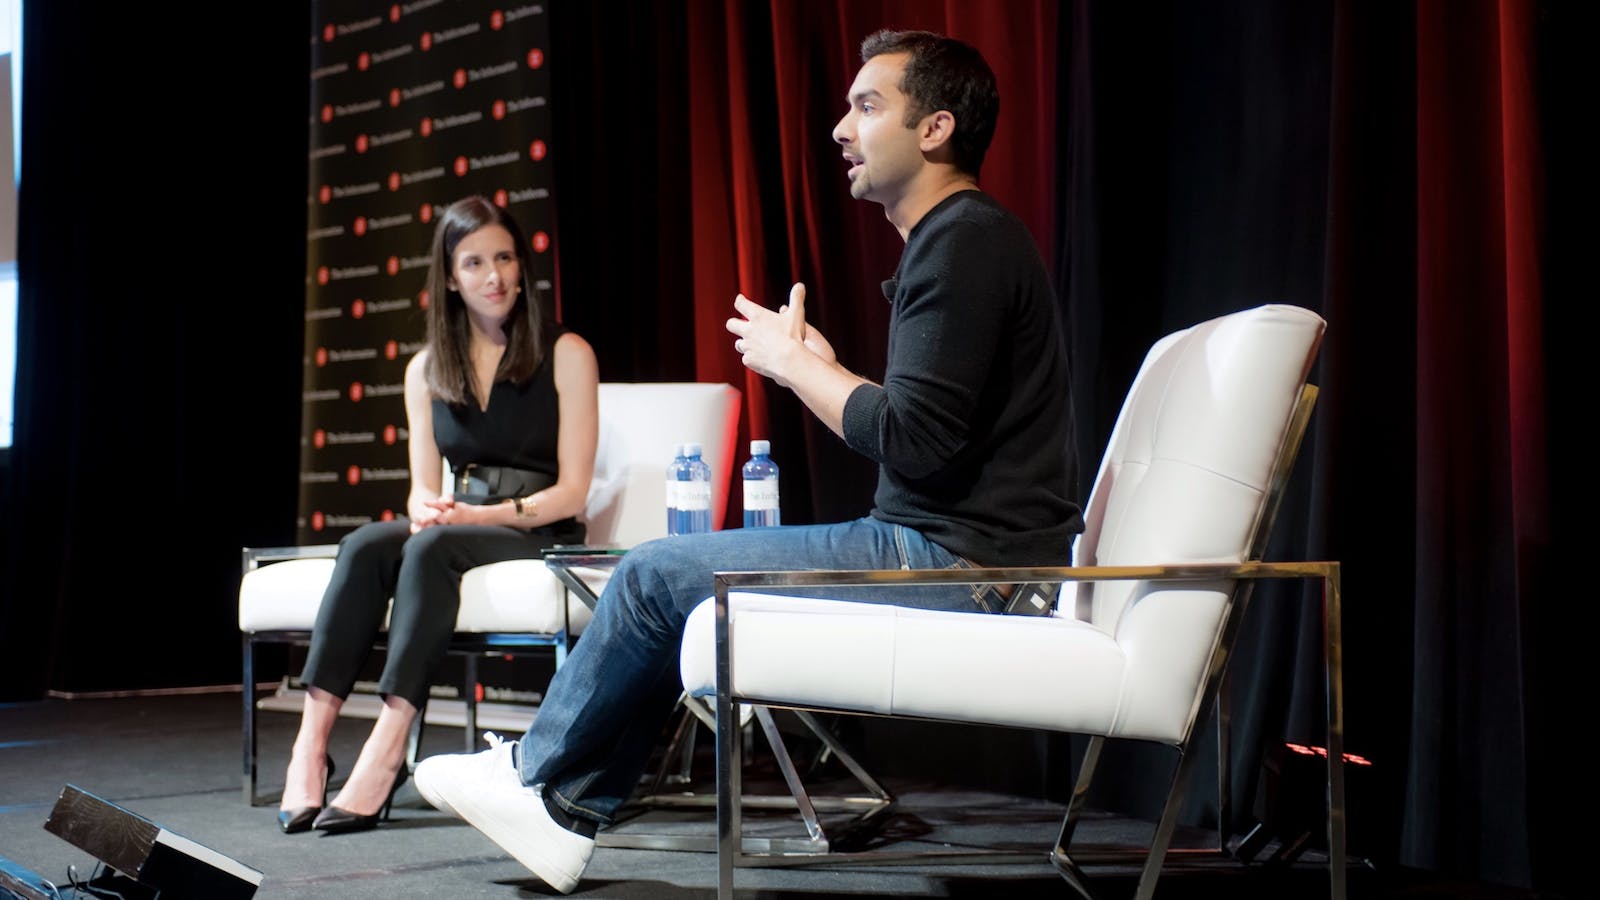 Instacart CEO Apoorva Mehta with The Information's Jessica Lessin at The Information's Subscriber Summit on Thursday. Photo by Angie Silvy￼
